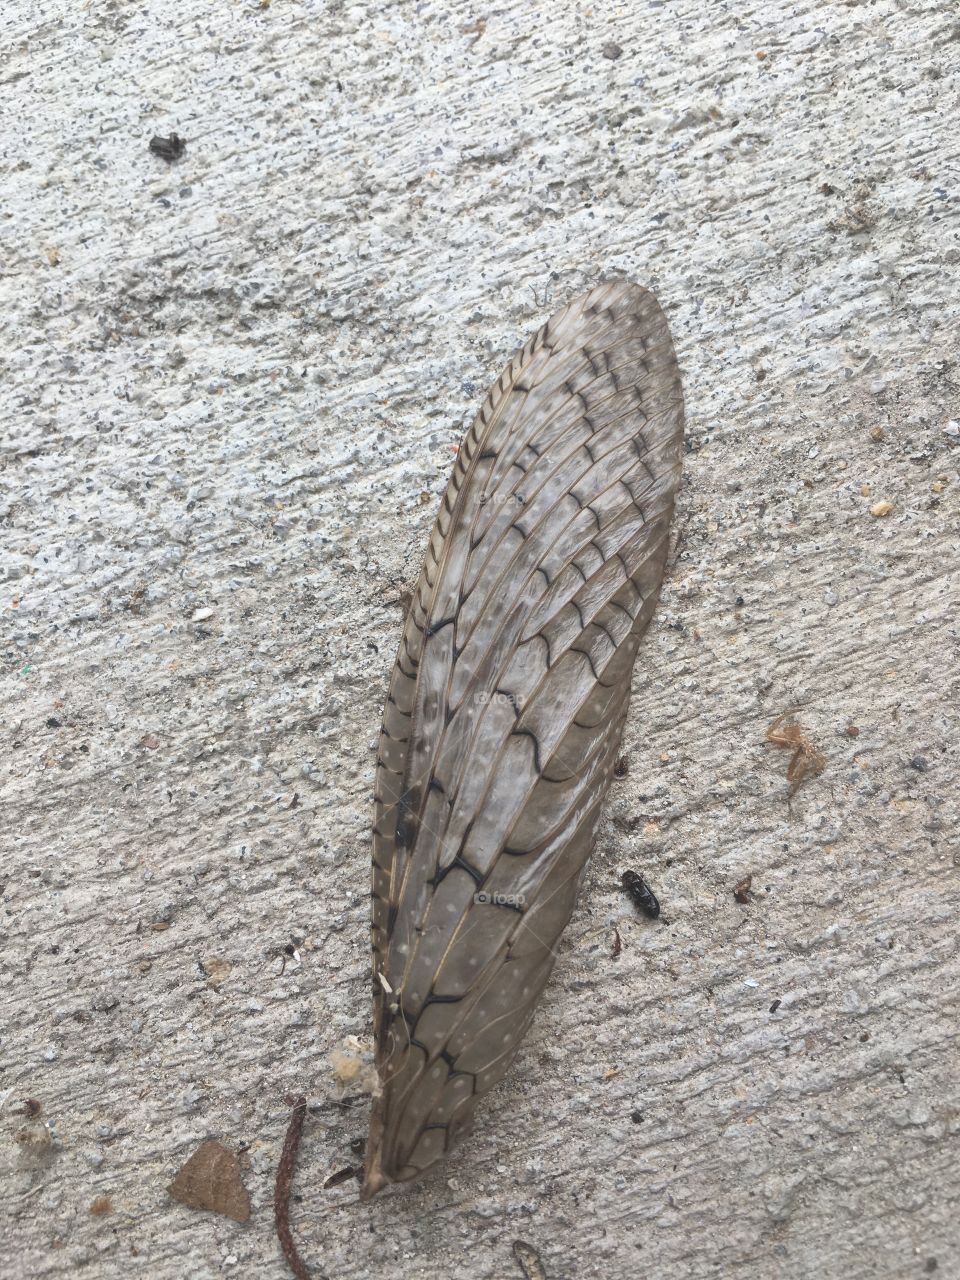 Discarded wing.